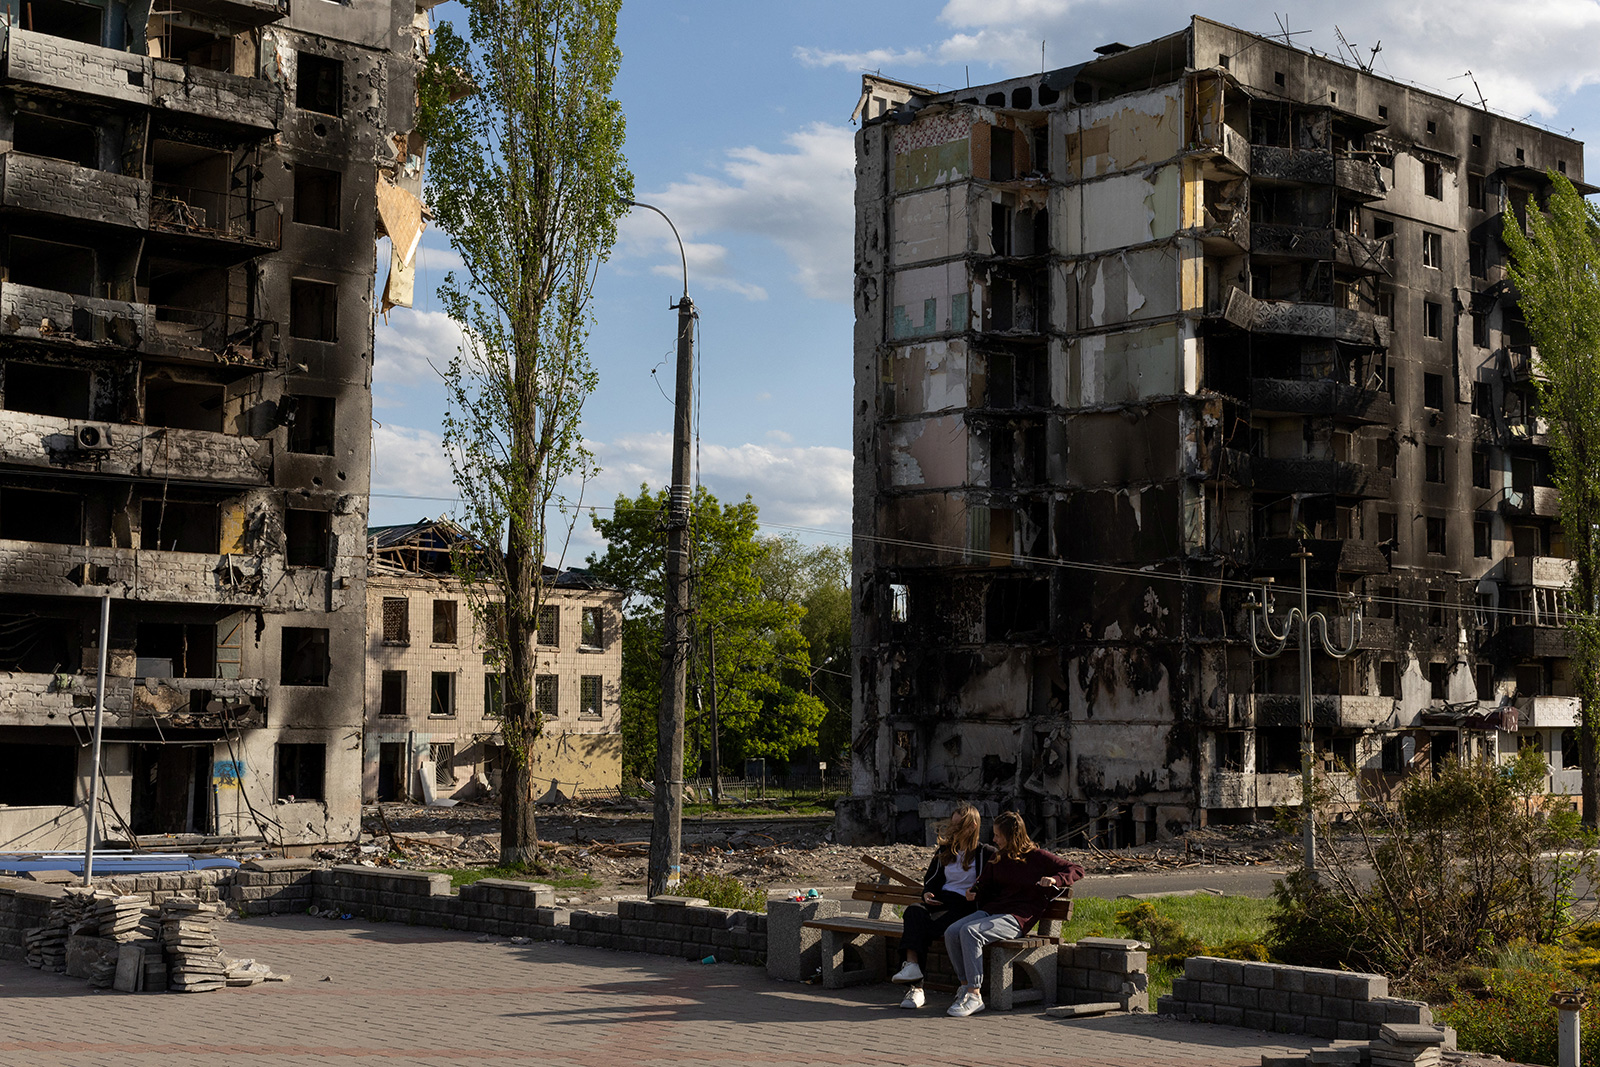 Two girls sit in a a public square in front of destroyed buildings in Borodyanka outside the Ukrainian capital of Kyiv, Ukraine on May 16.